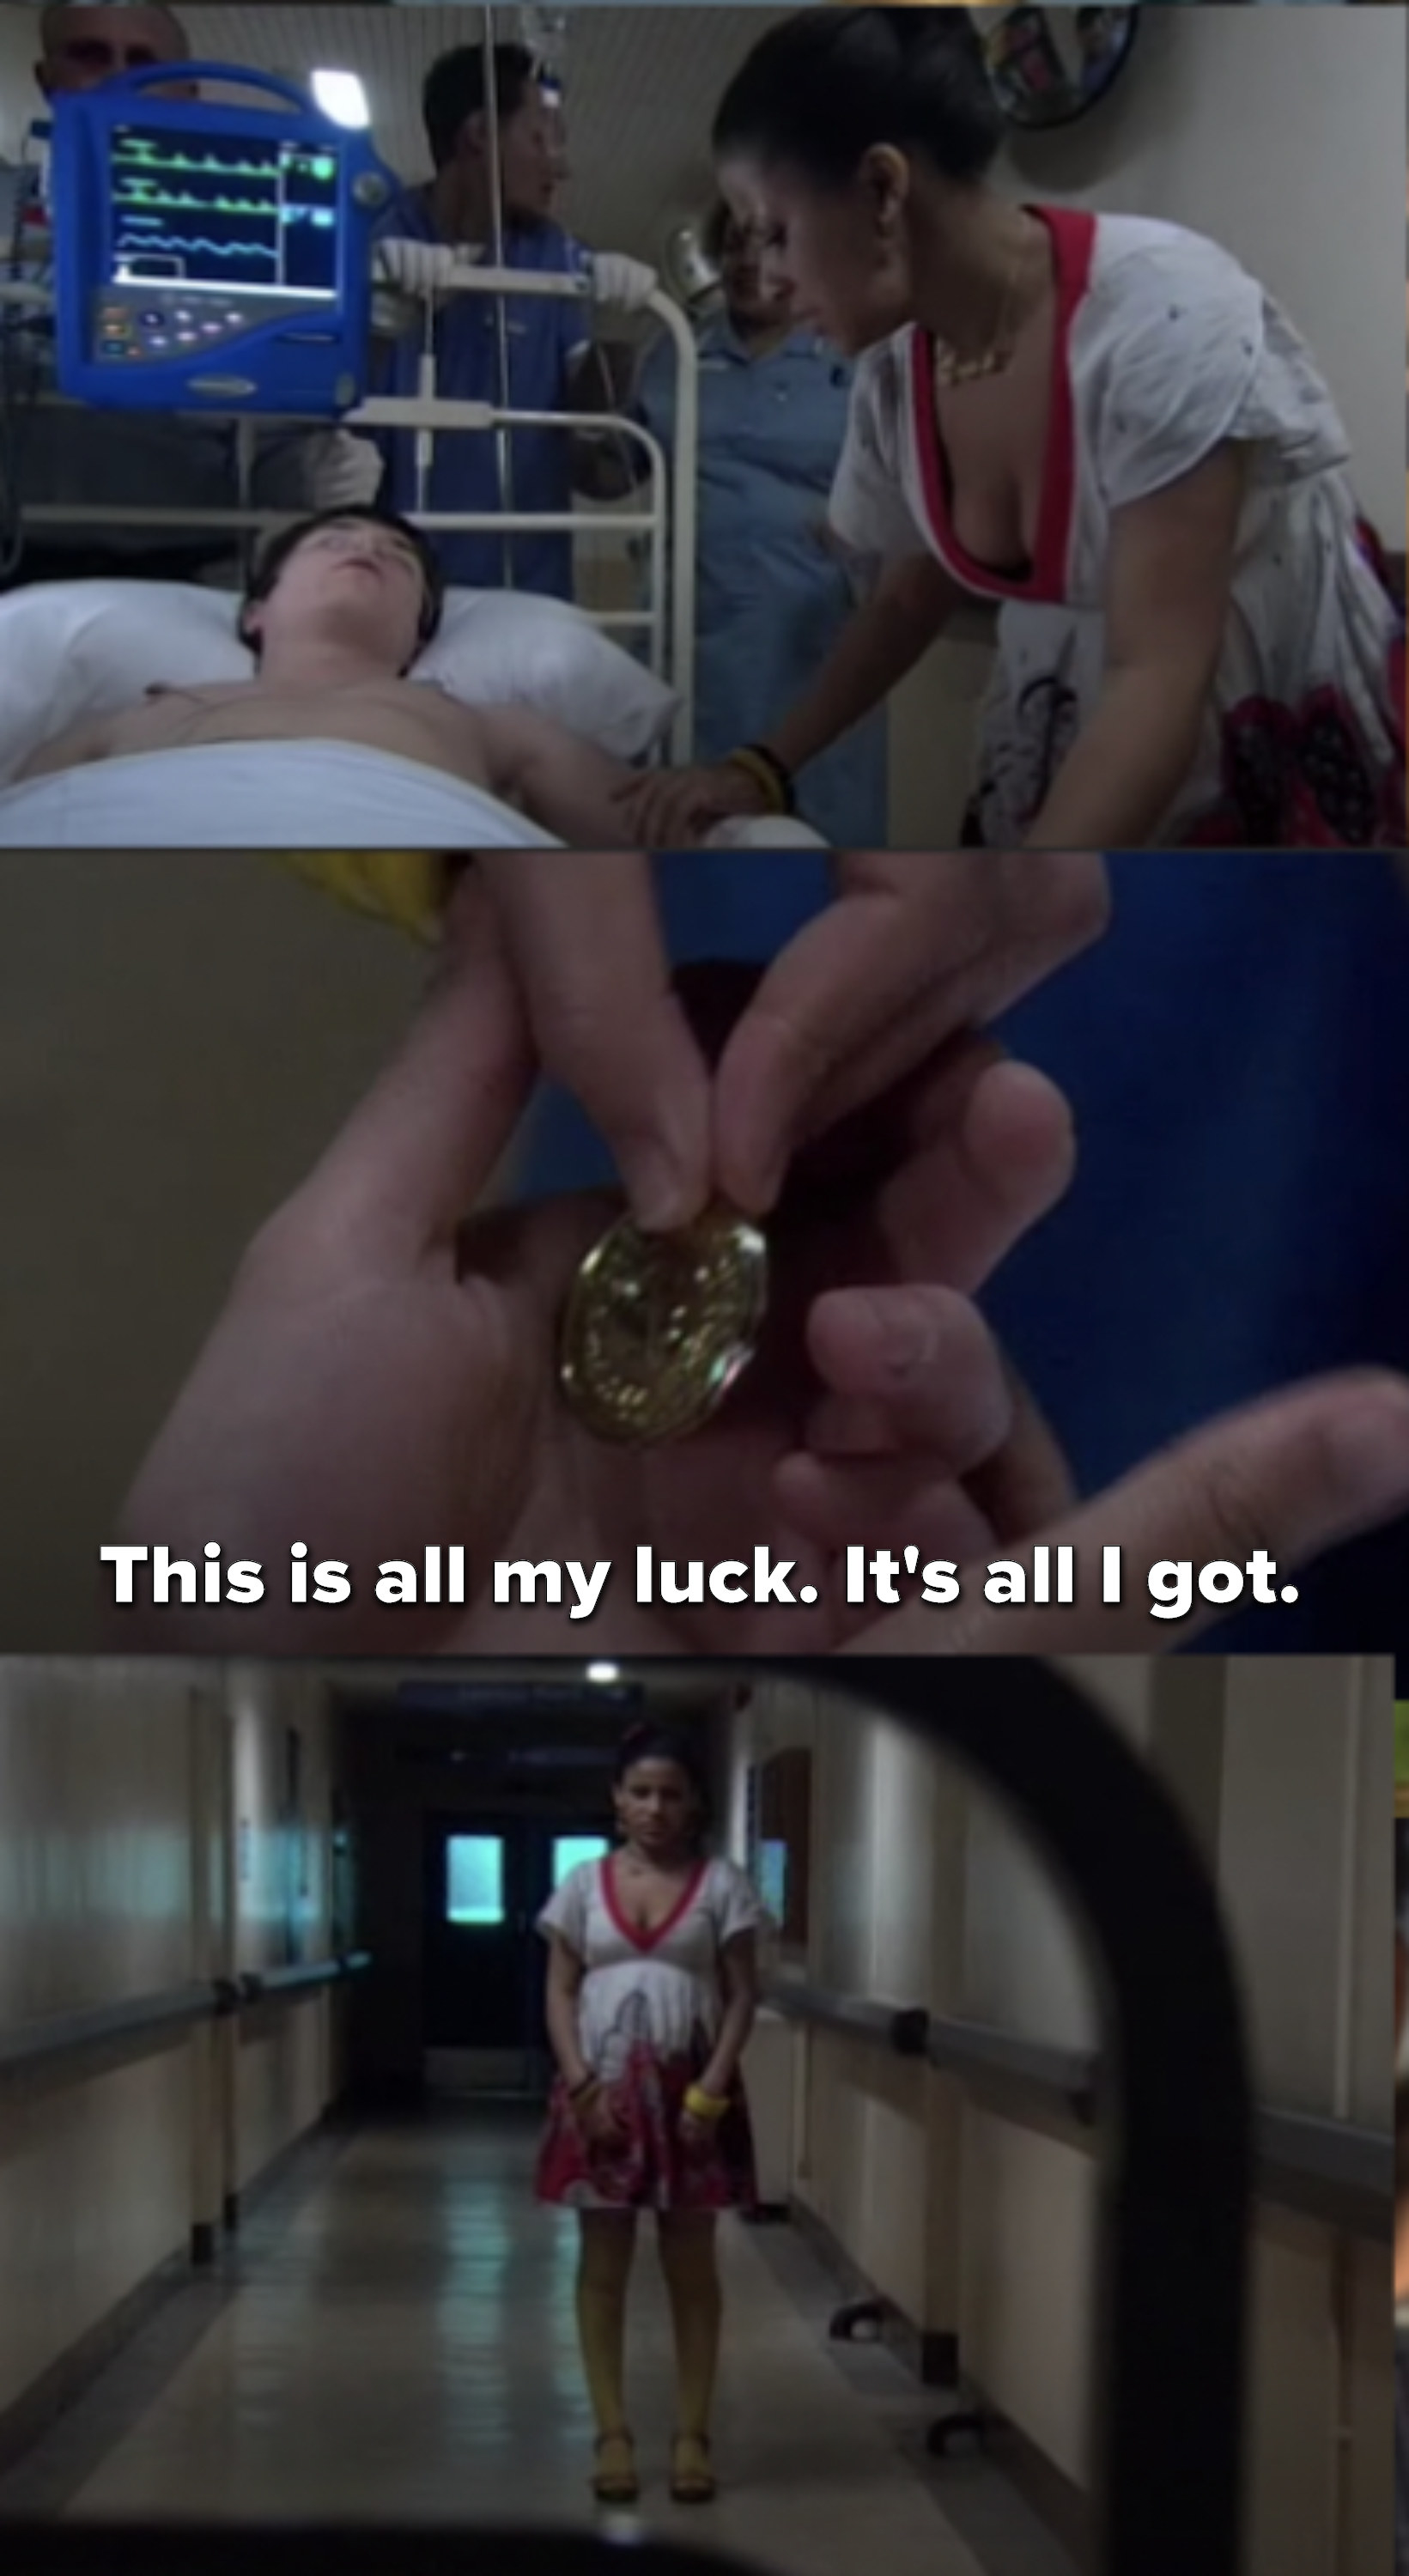 Jal handing him the coin as he gets wheeled away: &quot;This is all my luck. It&#x27;s all I got&quot;